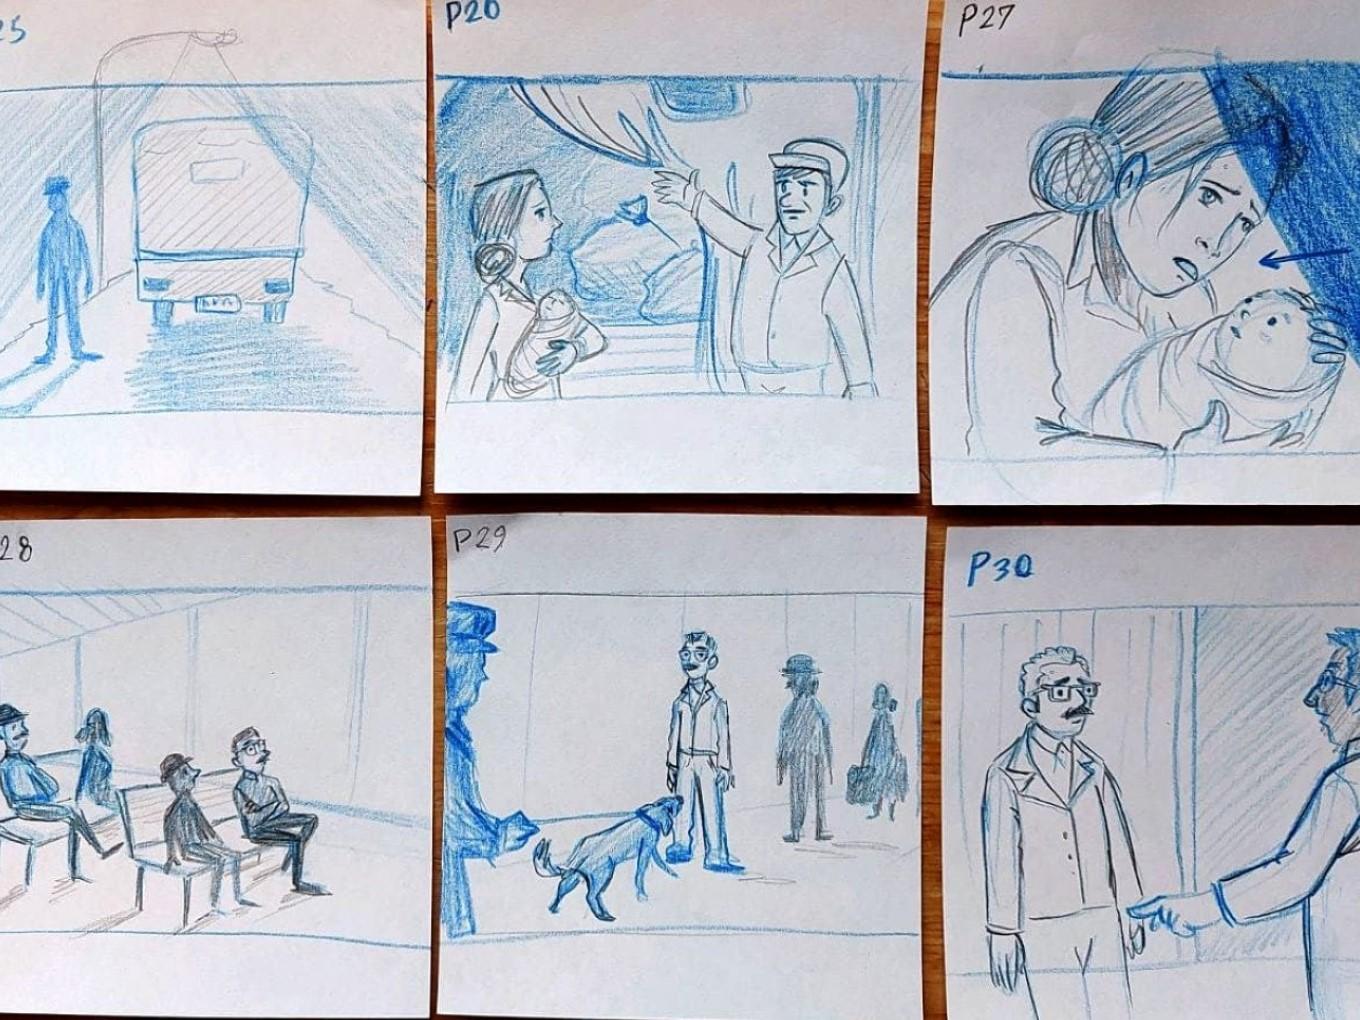 So-called thumb nails as small-format sketches for the motion comic "Border Crossings", drawn by Azam Aghalouy and Hassan Tavakoli.